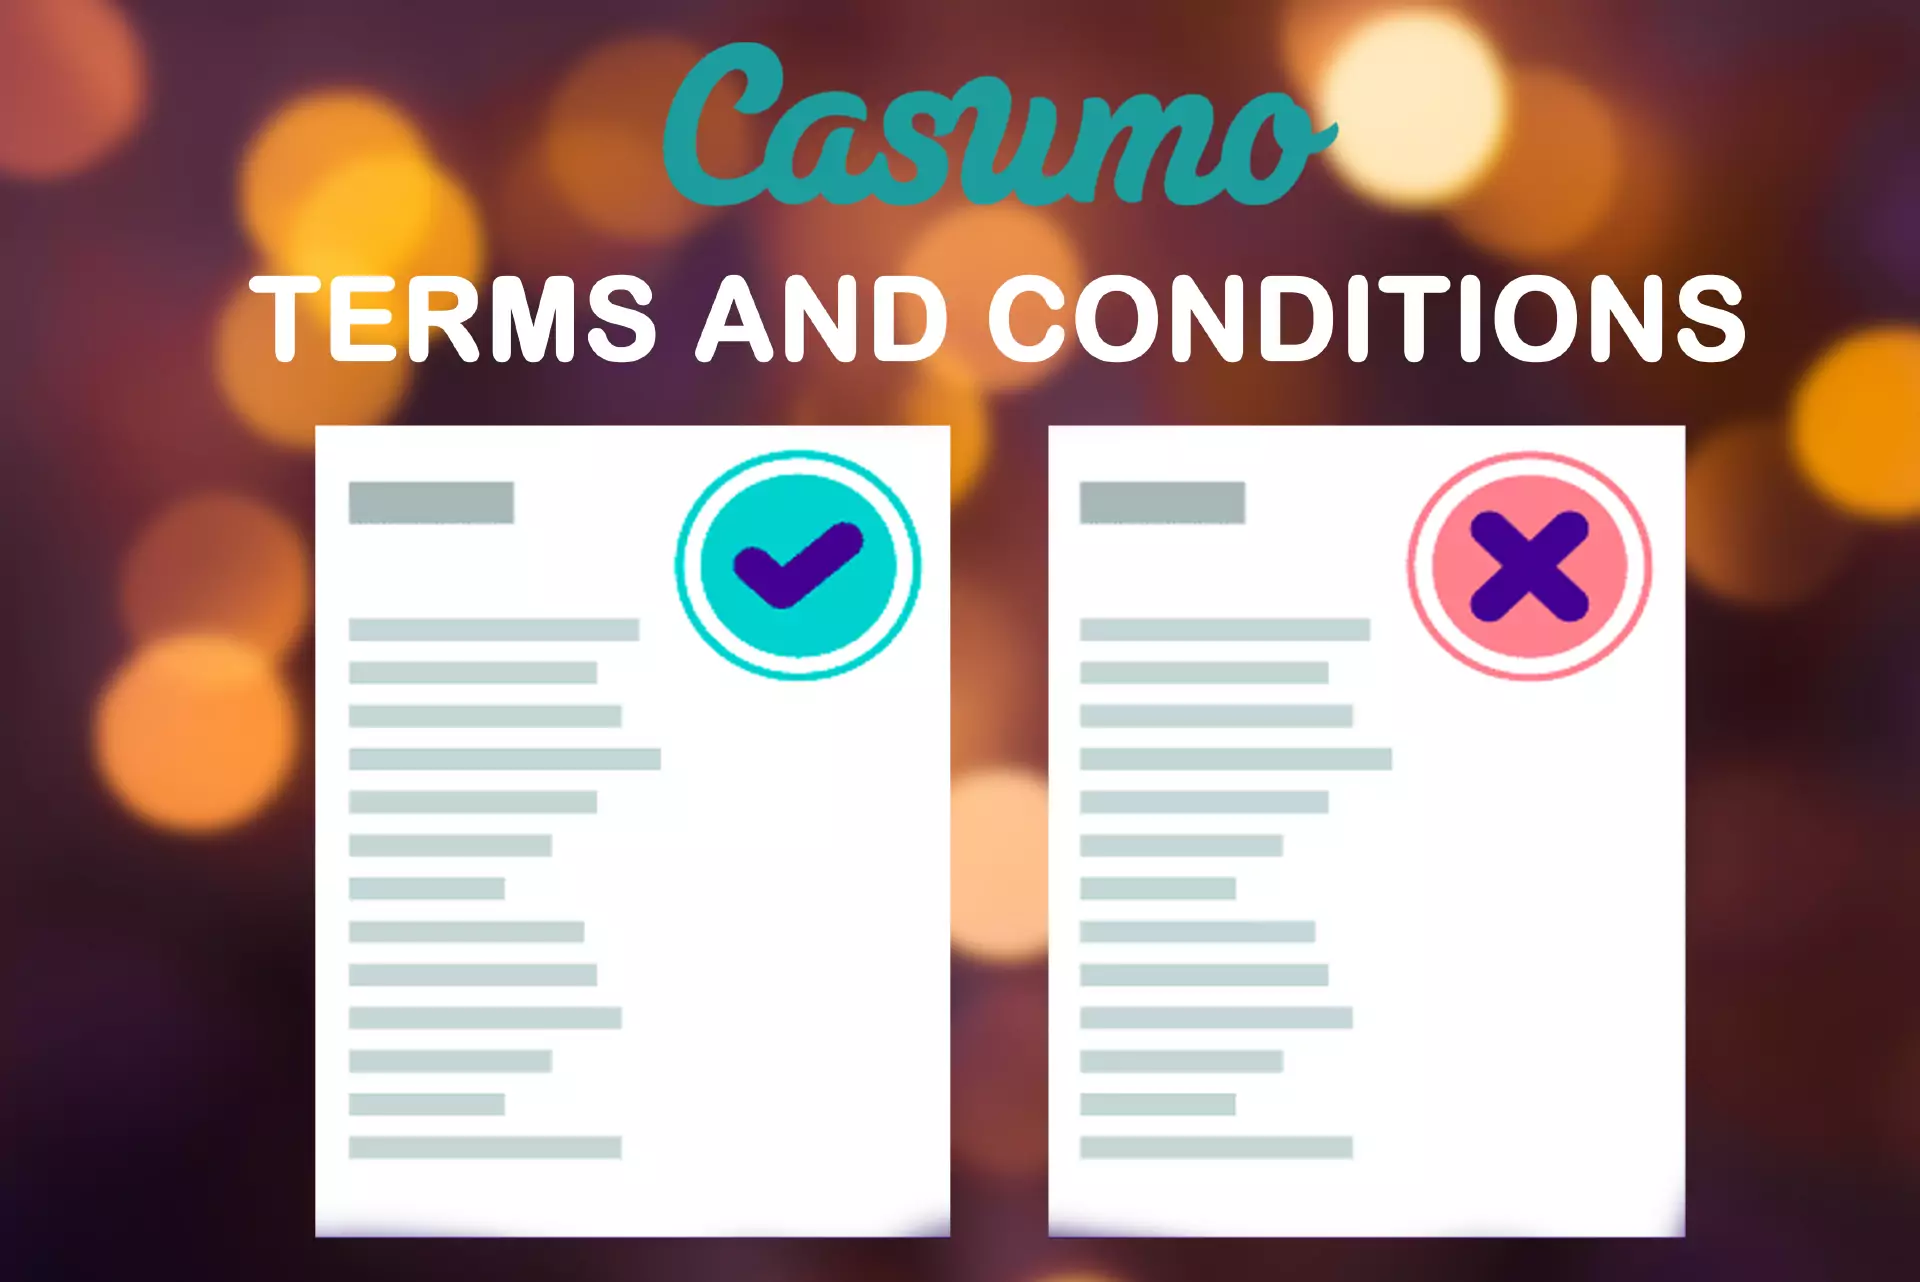 Note the terms and conditions of Casumo to get bonuses properly and on time.